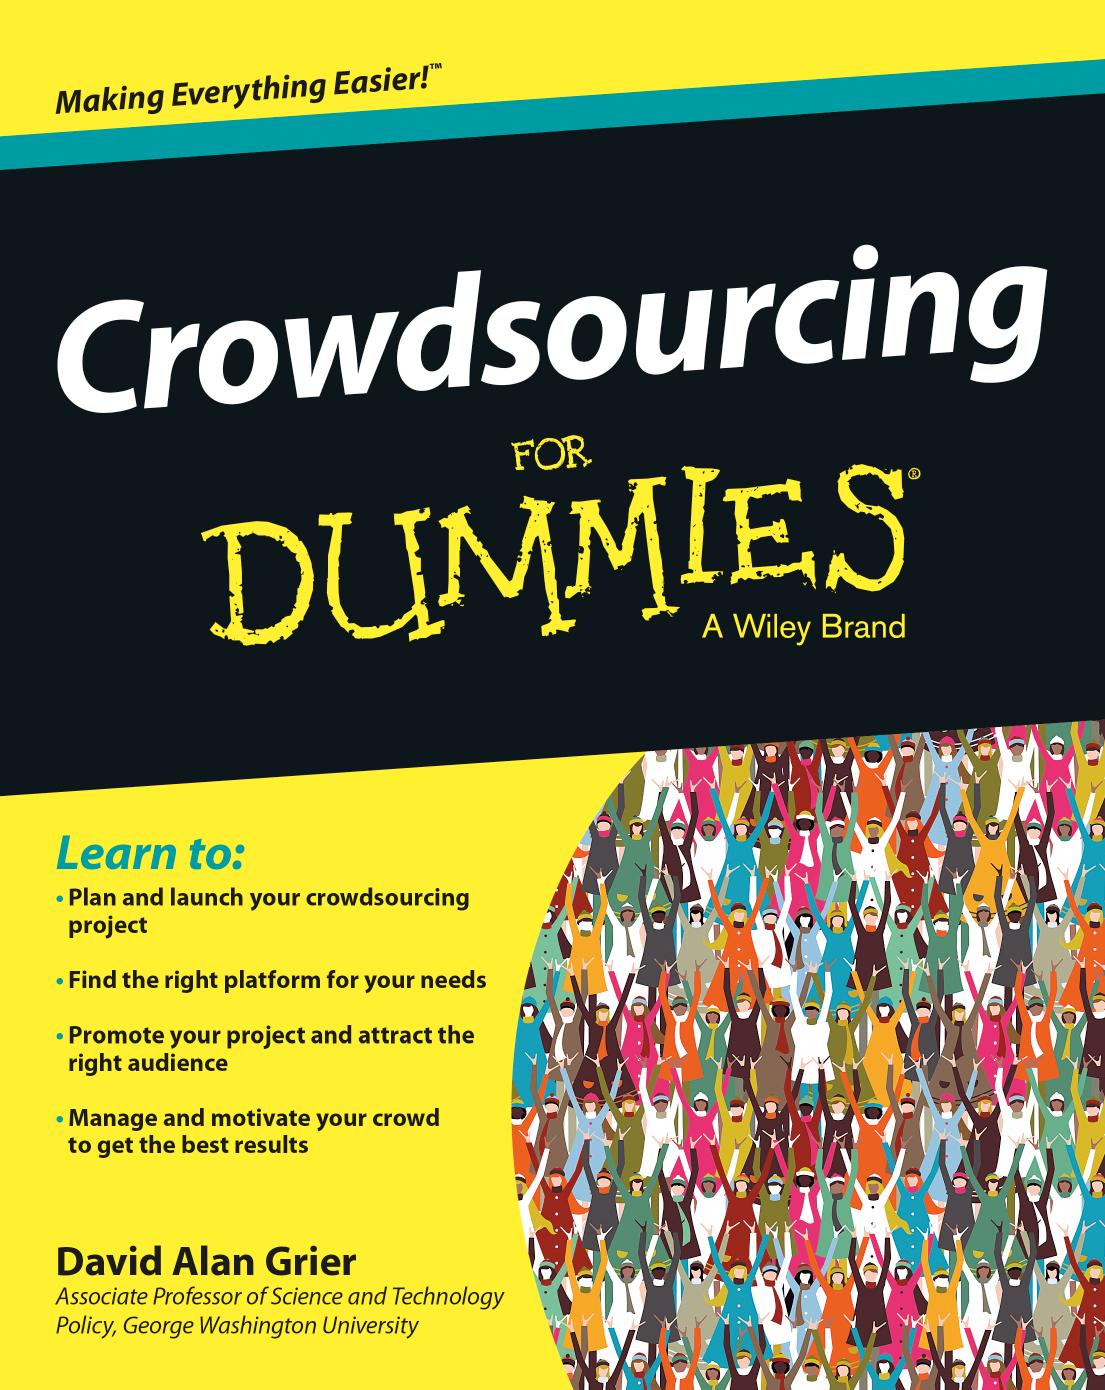 Crowdsourcing For Dummies by David Alan Grier